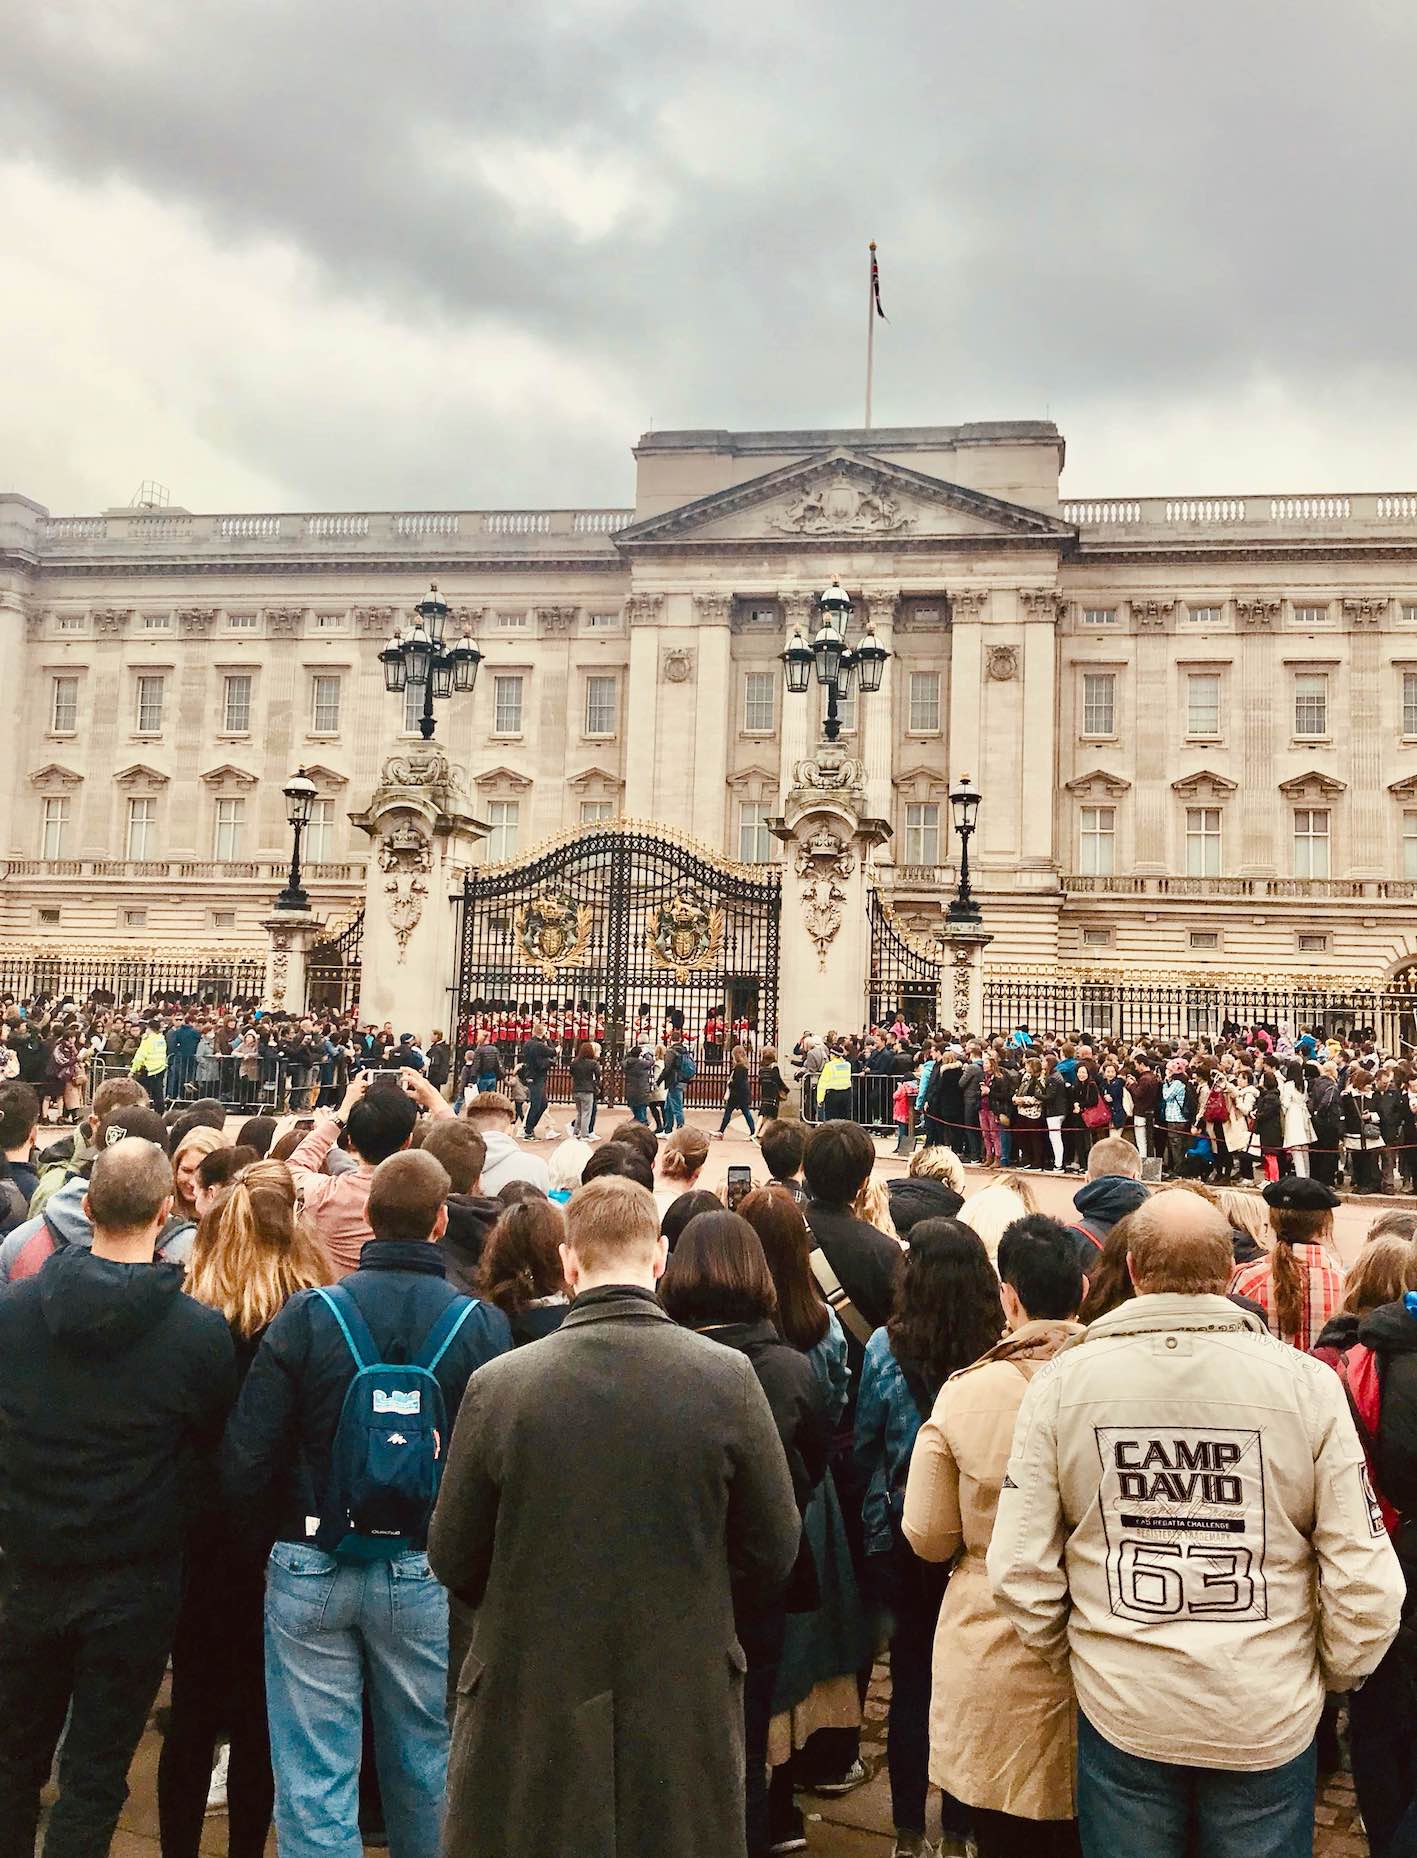 Stuck behind the crowds during The Changing of the Guard at Buckingham Palace